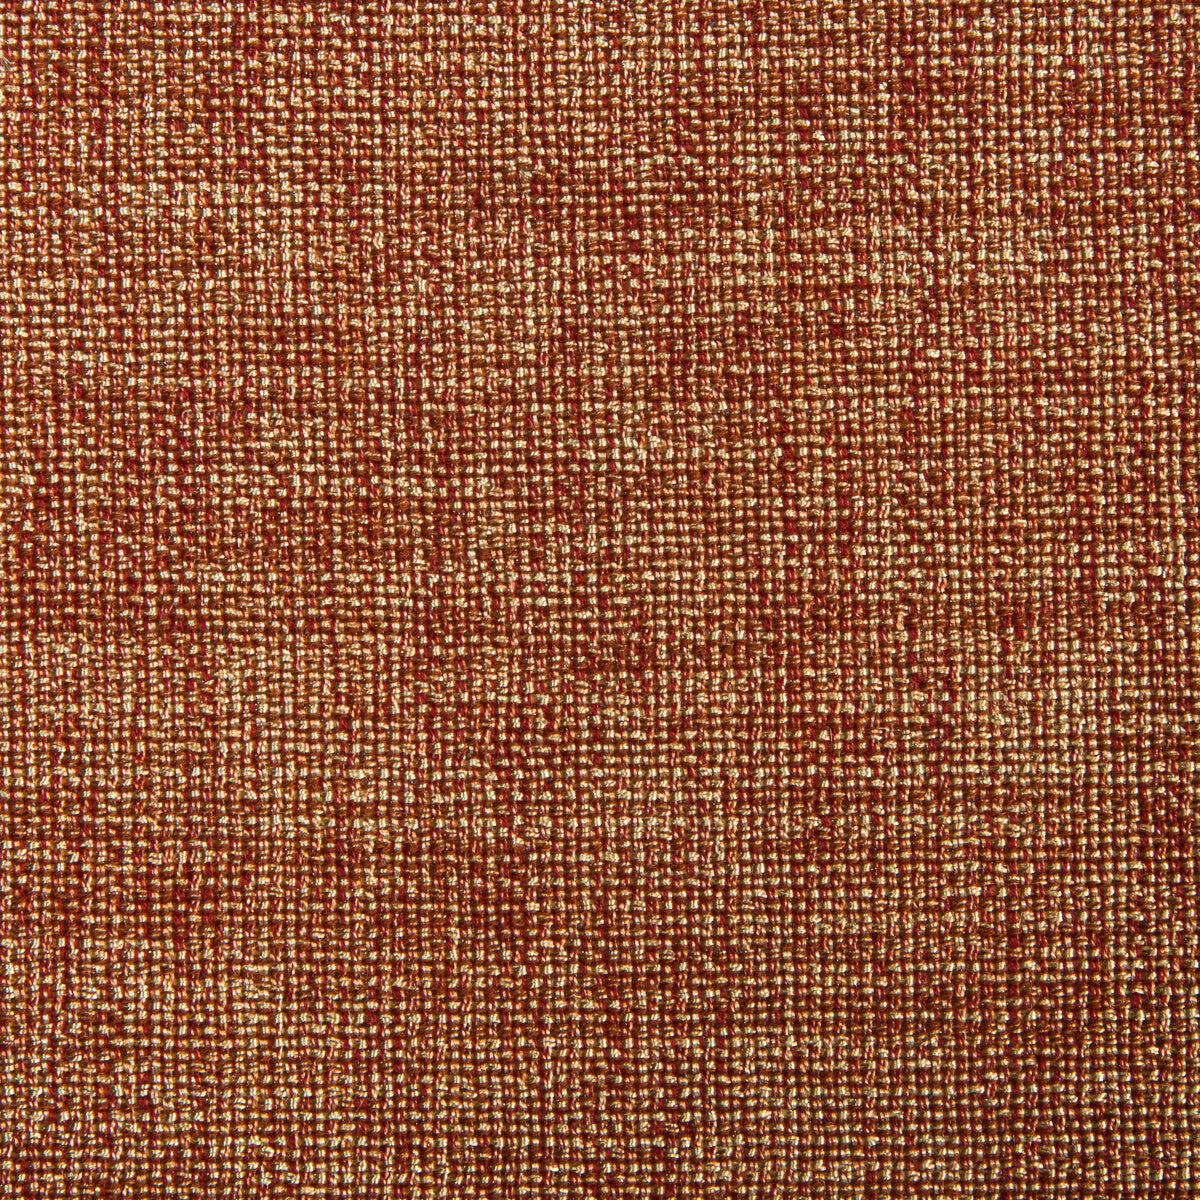 Kravet Contract fabric in 34926-24 color - pattern 34926.24.0 - by Kravet Contract